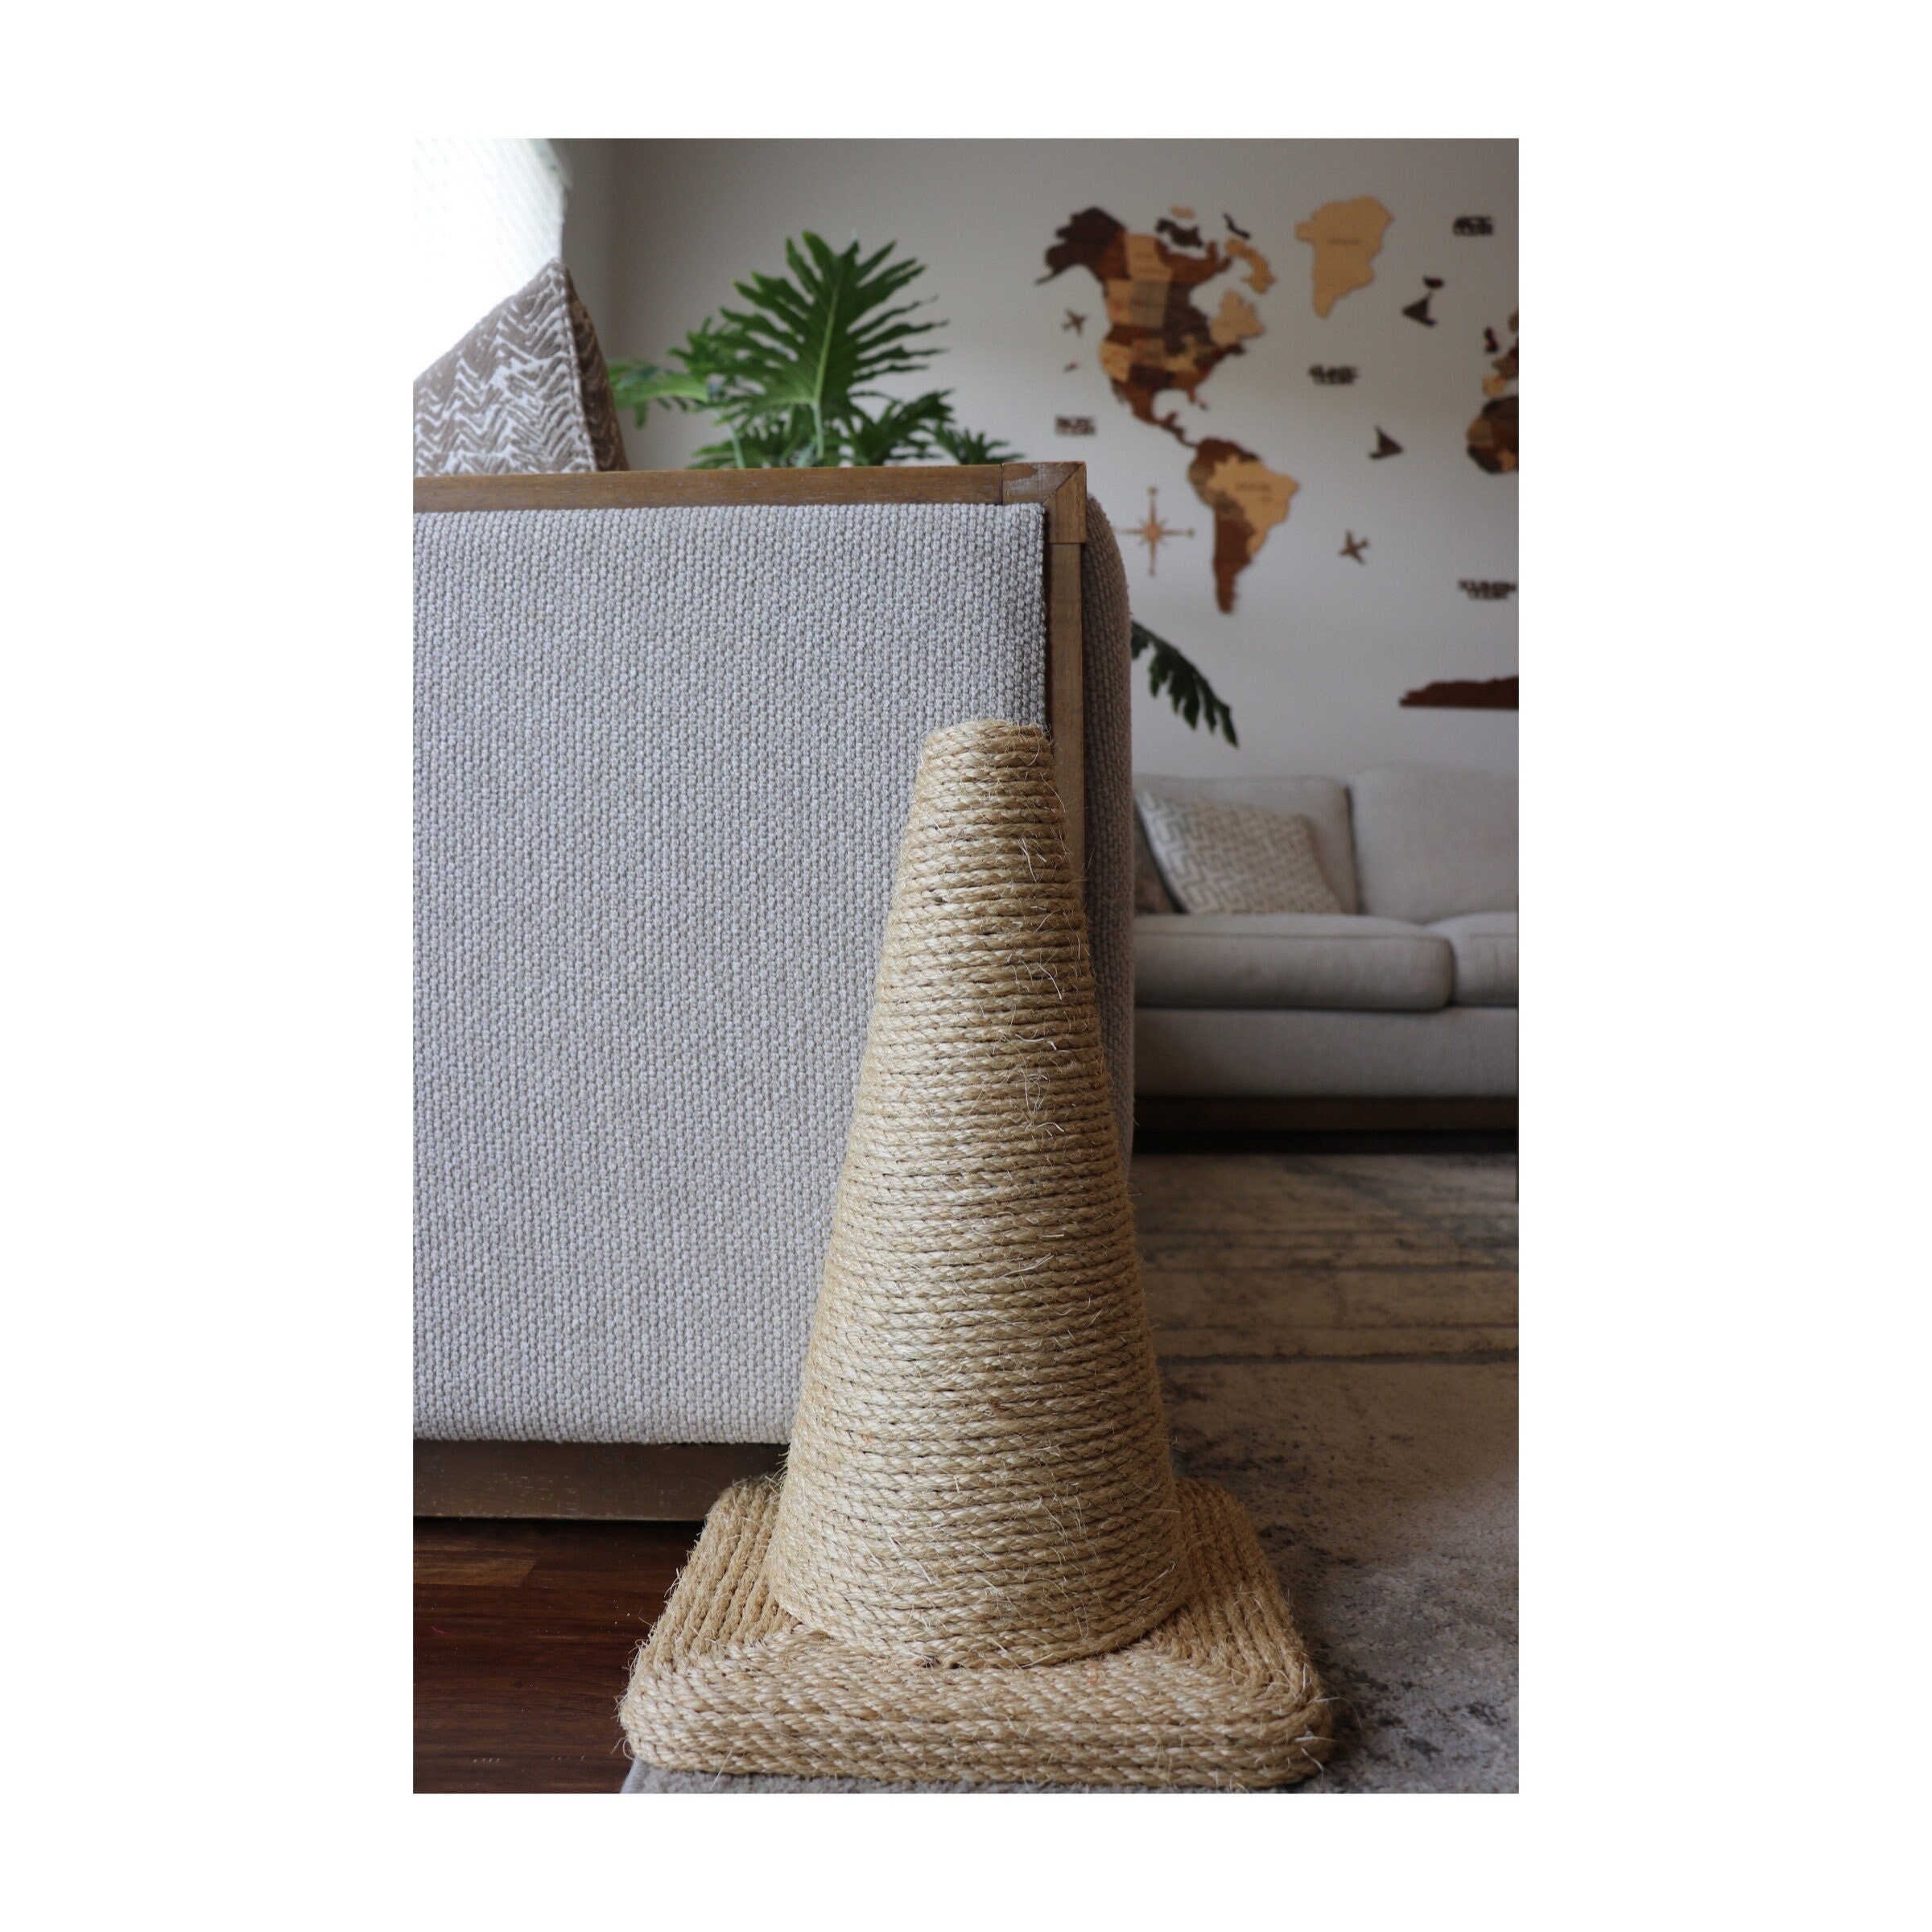 Protect Your Sofa From Scratches With a Couch Scratcher, Couch Corner Cat  Scratcher, Couch Scratching Post, Cat Scratch Furniture Protector 